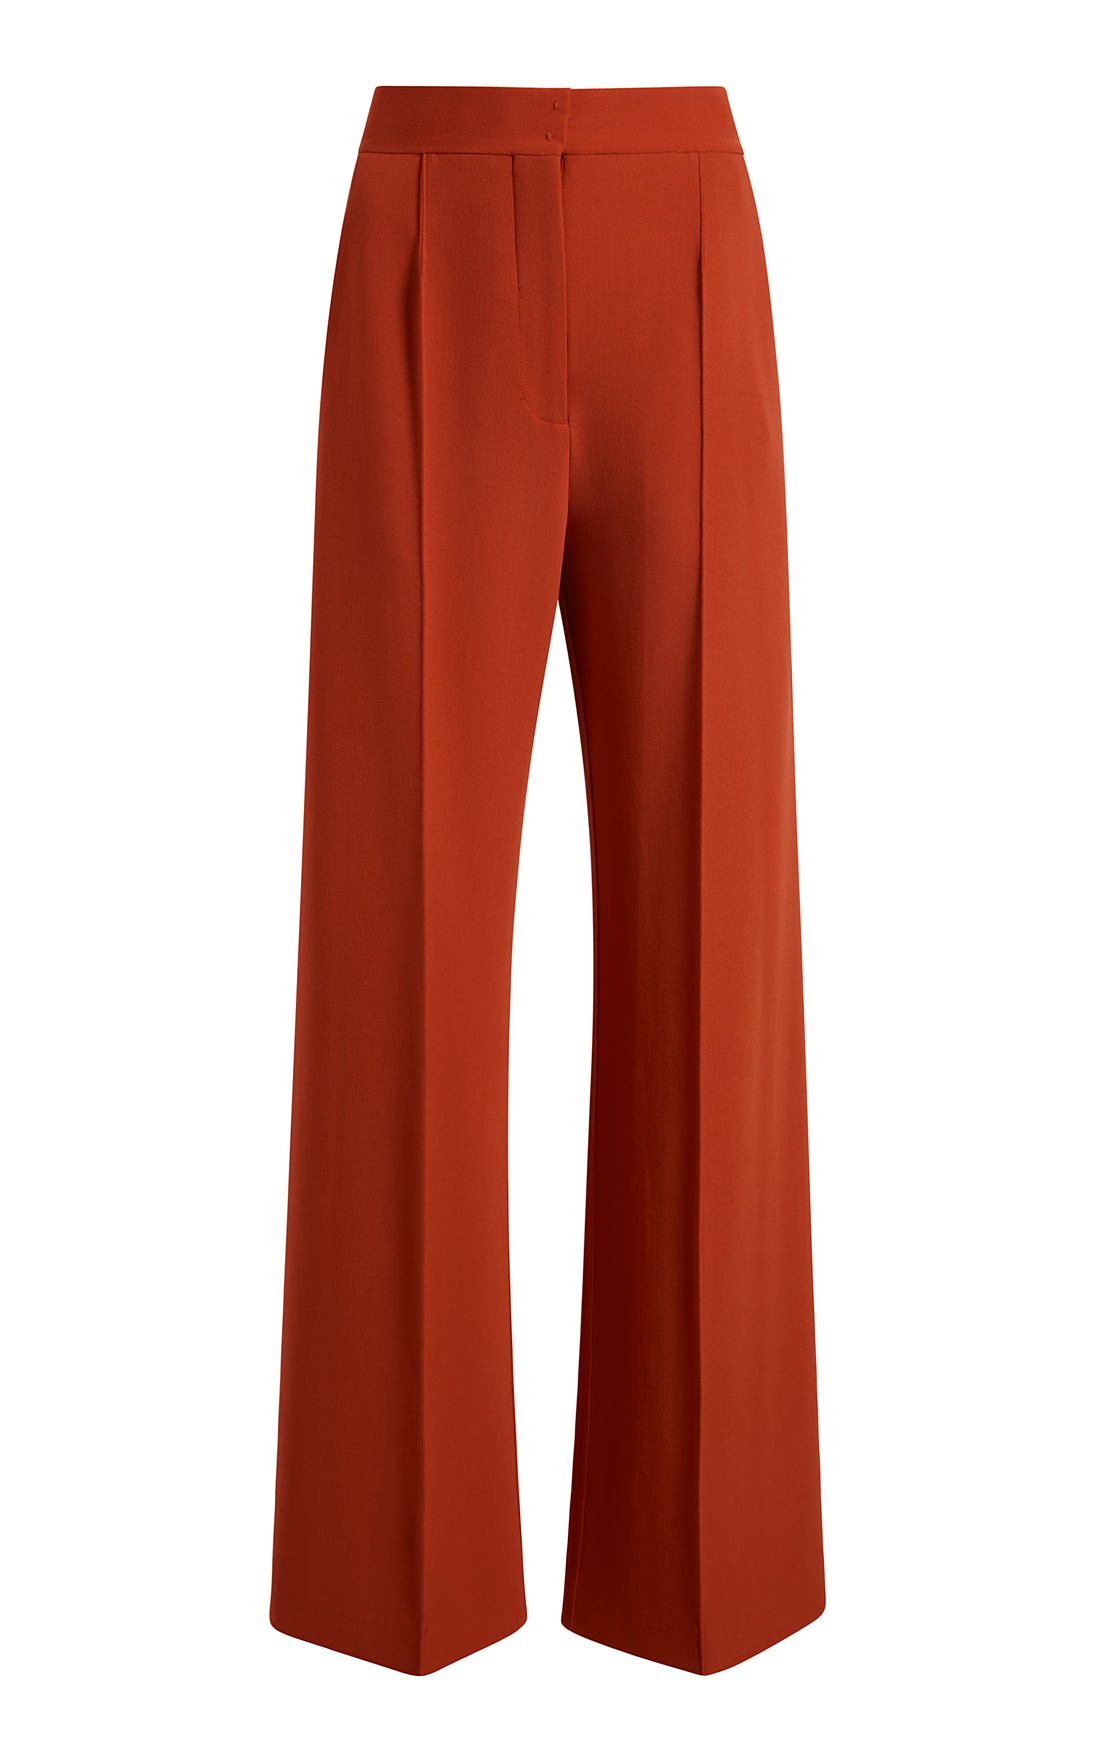 Red Wide Leg Pants, Made in South Africa